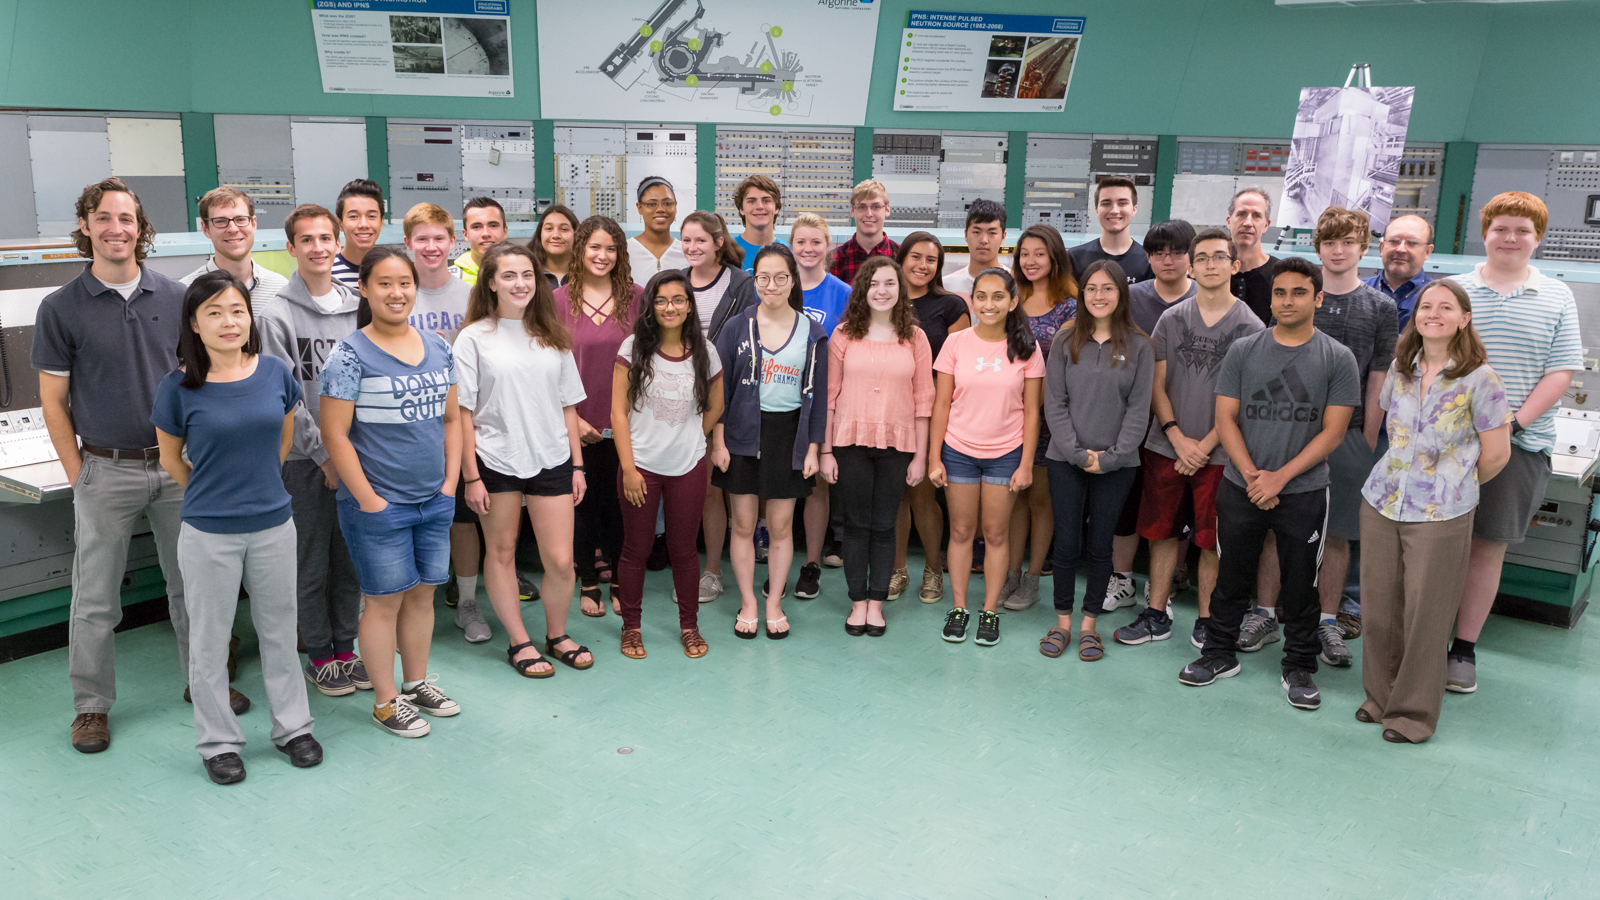 Students break for a group photo with teachers and organizers during this summer’s coding camp in Argonne’s historic 1960’s control room.